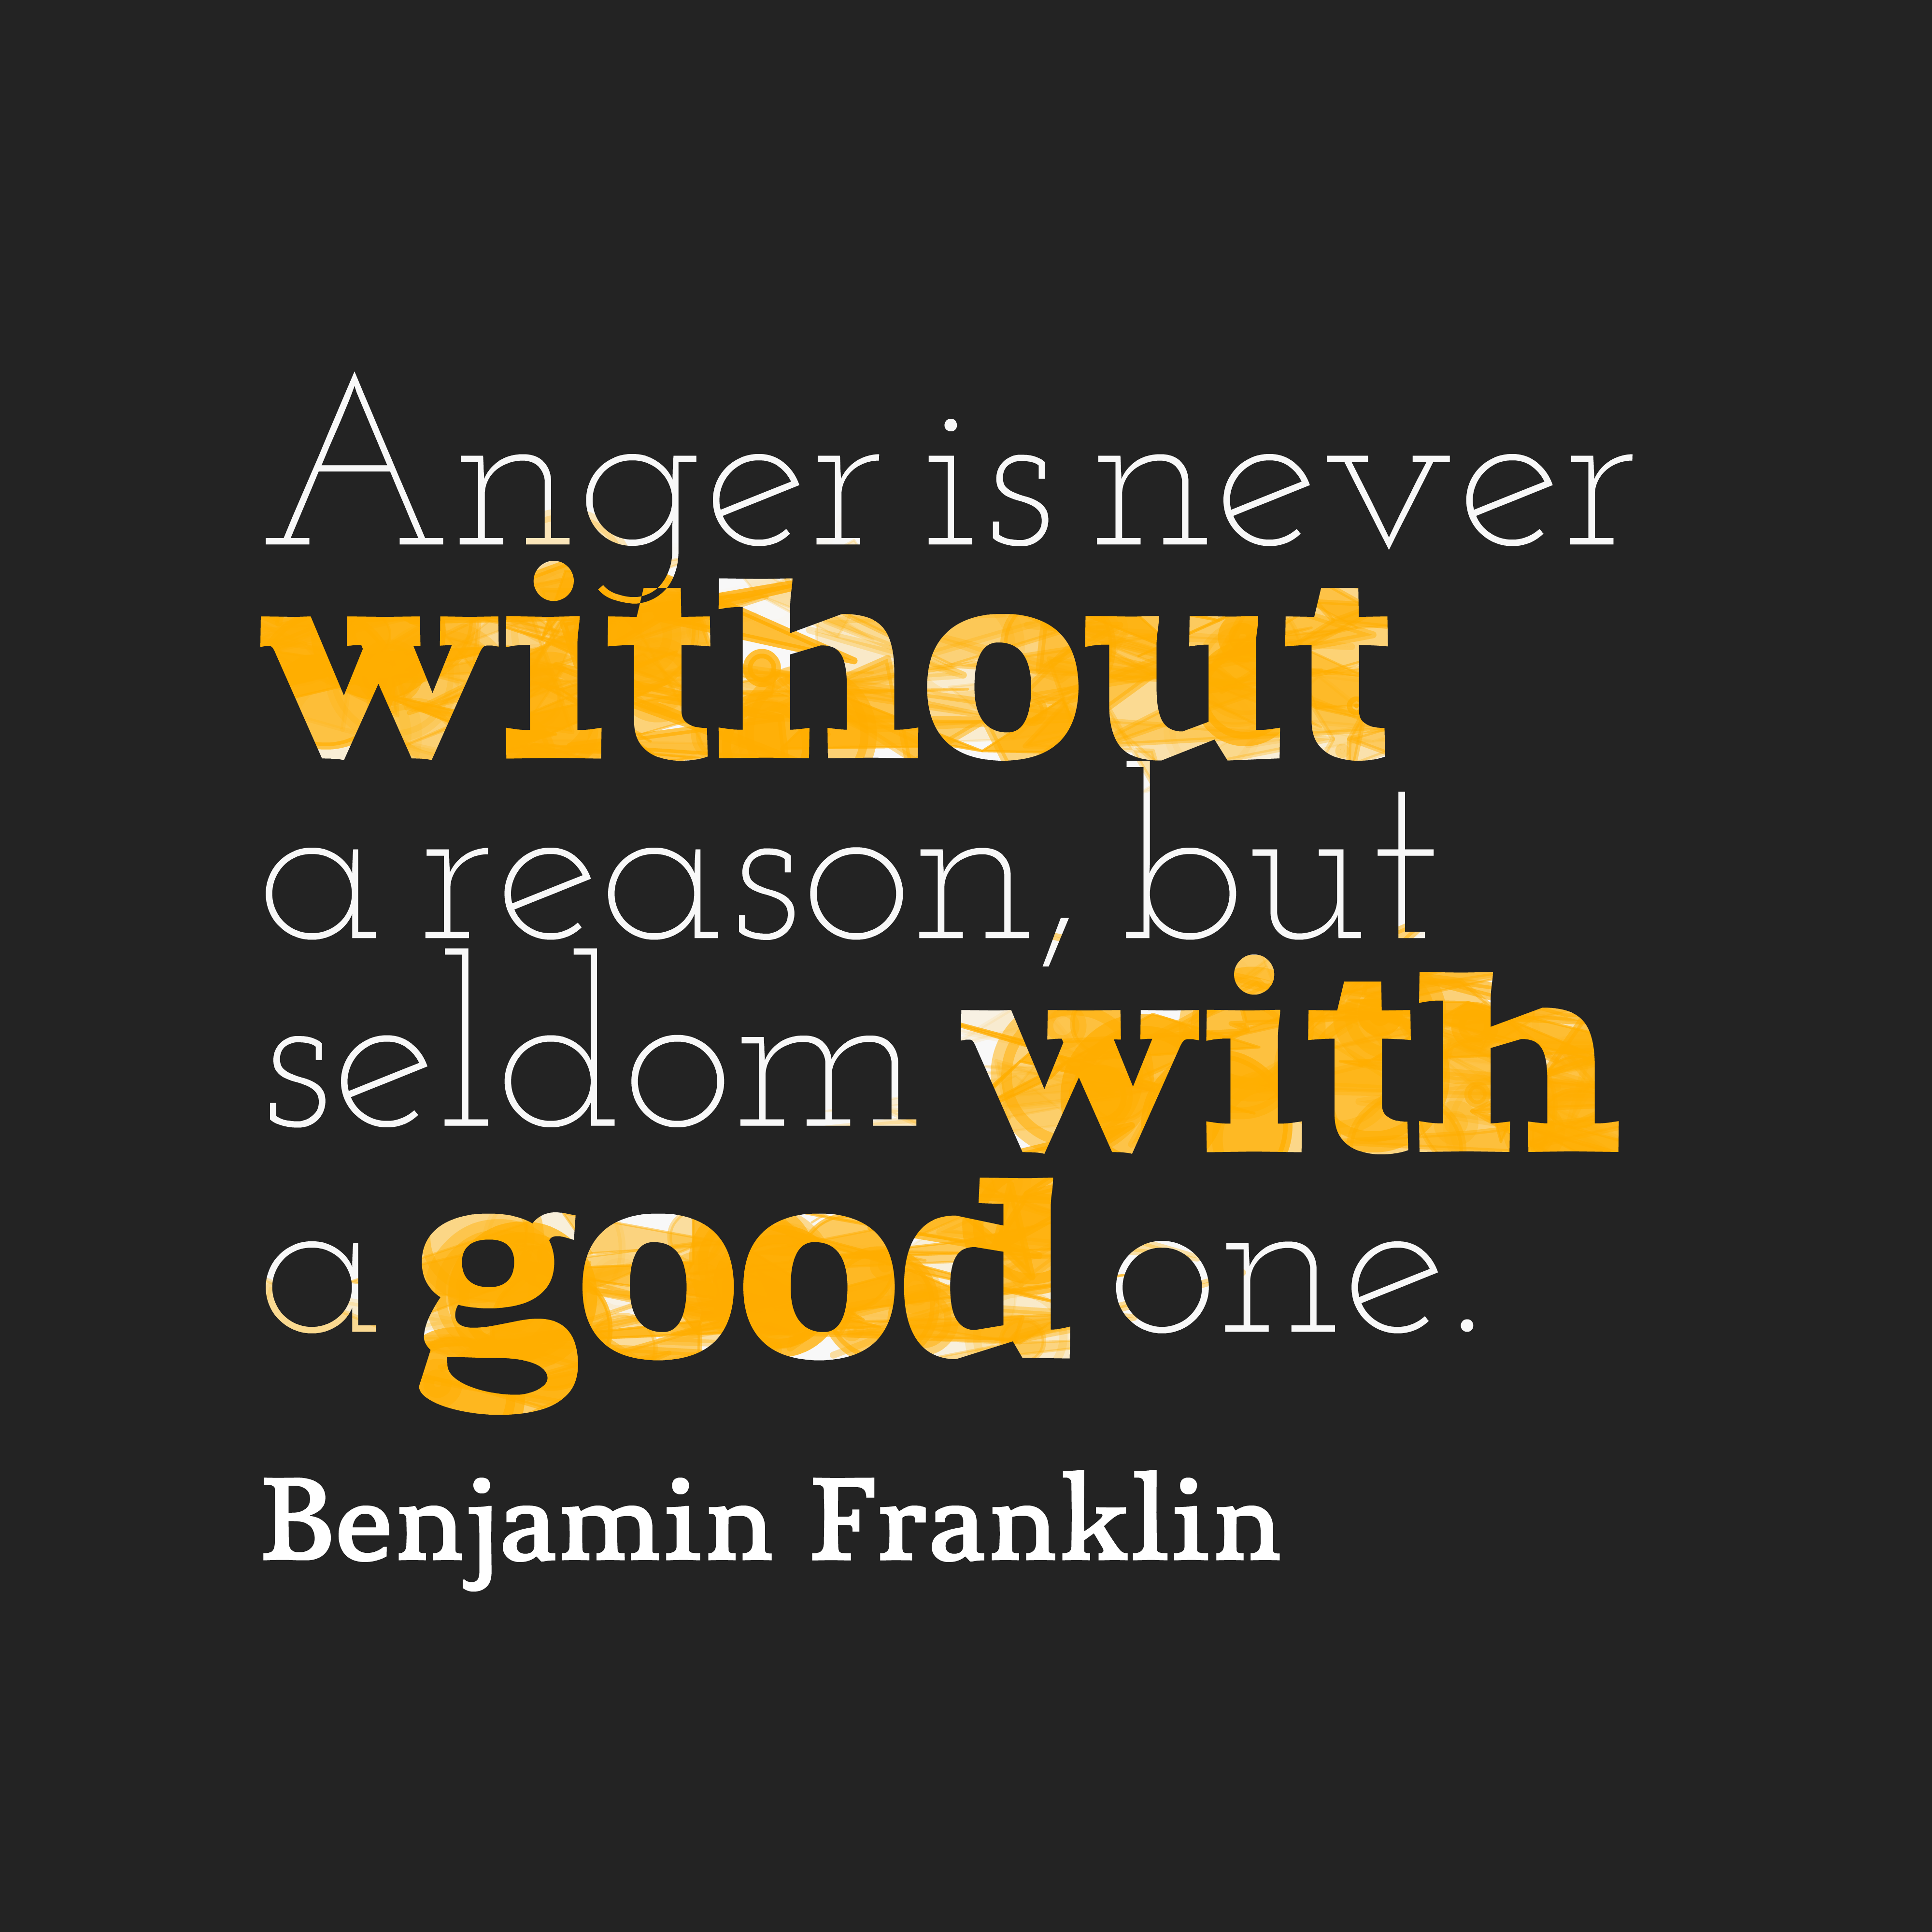 Anger is never without Reason, but seldom with a good One. Benjamin Franklin